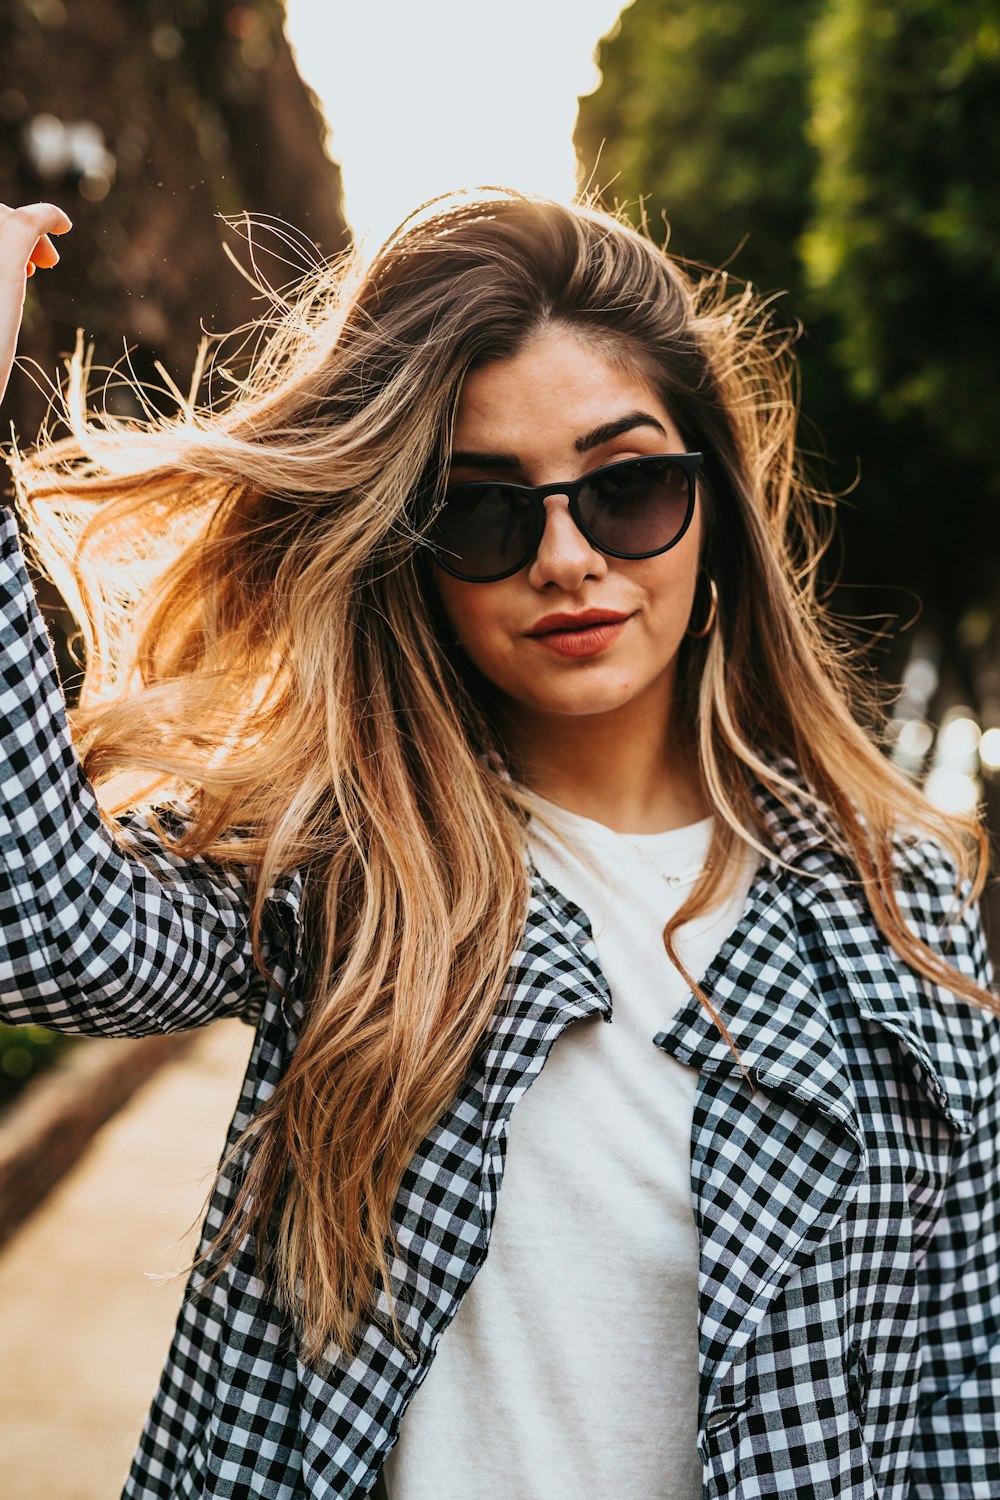 Attitude Girl Pictures | Download Free Images on Unsplash